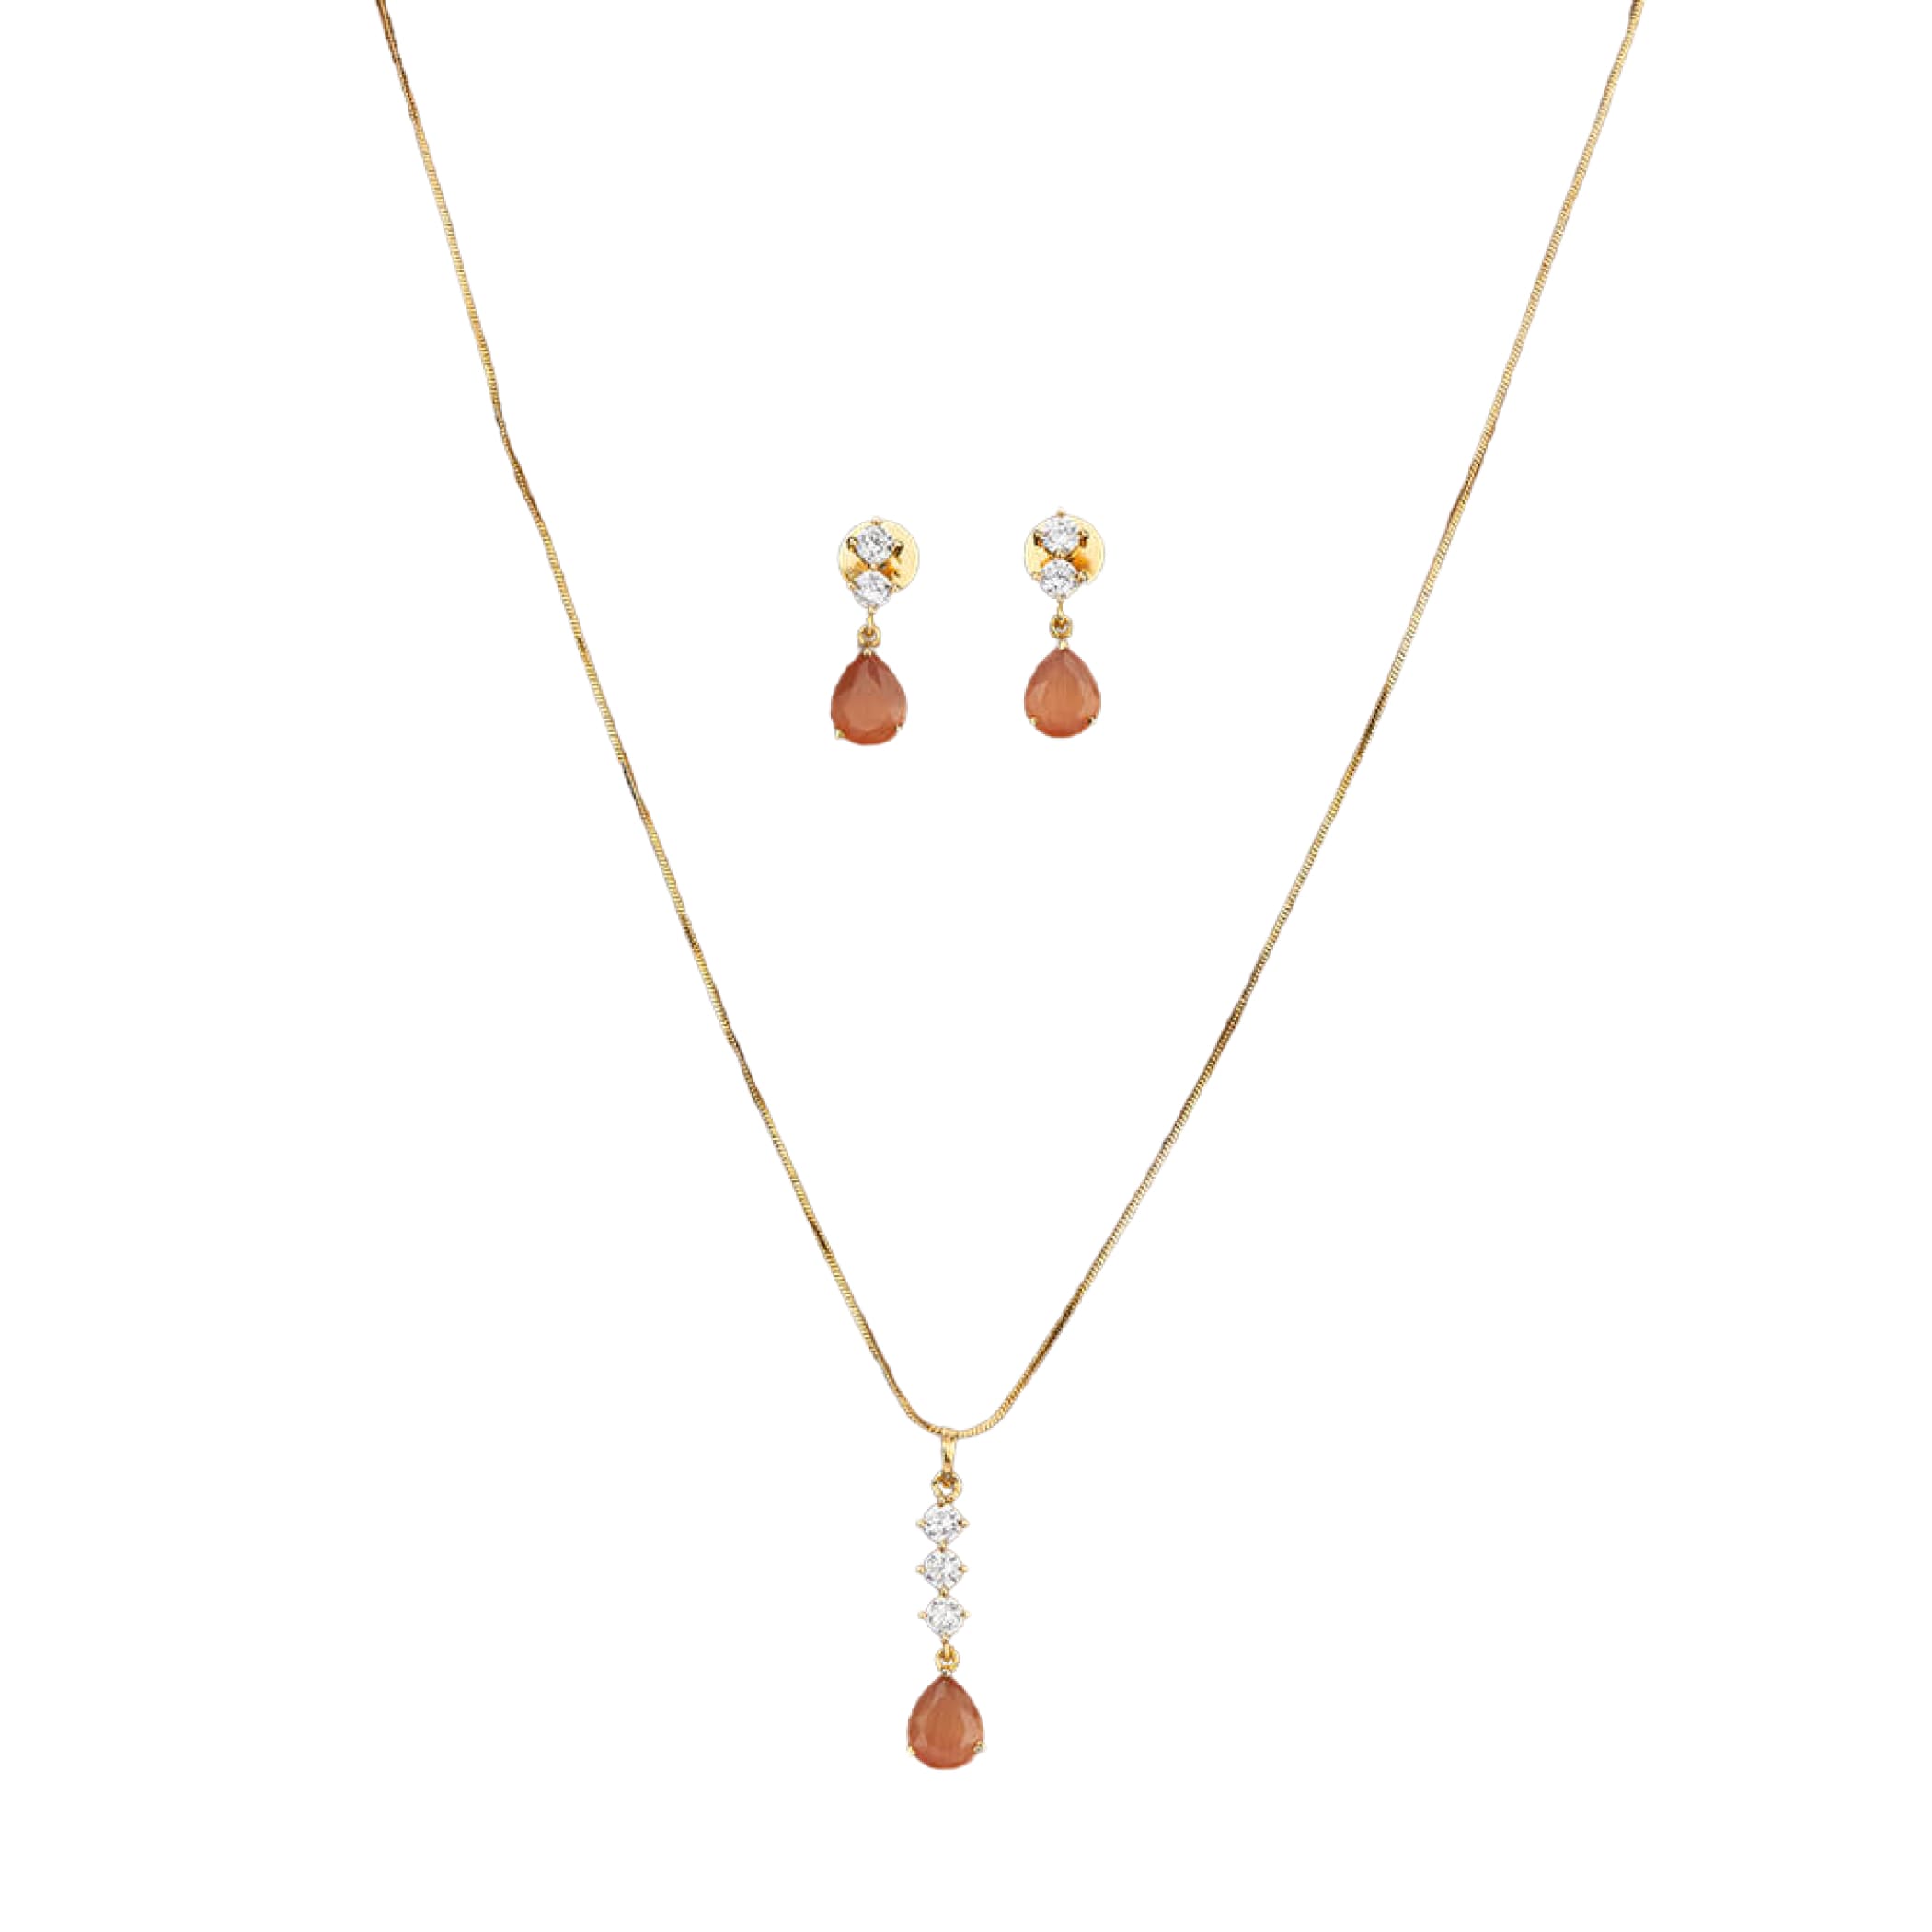 Cz classic pendant set with gold plating jewelry traditional